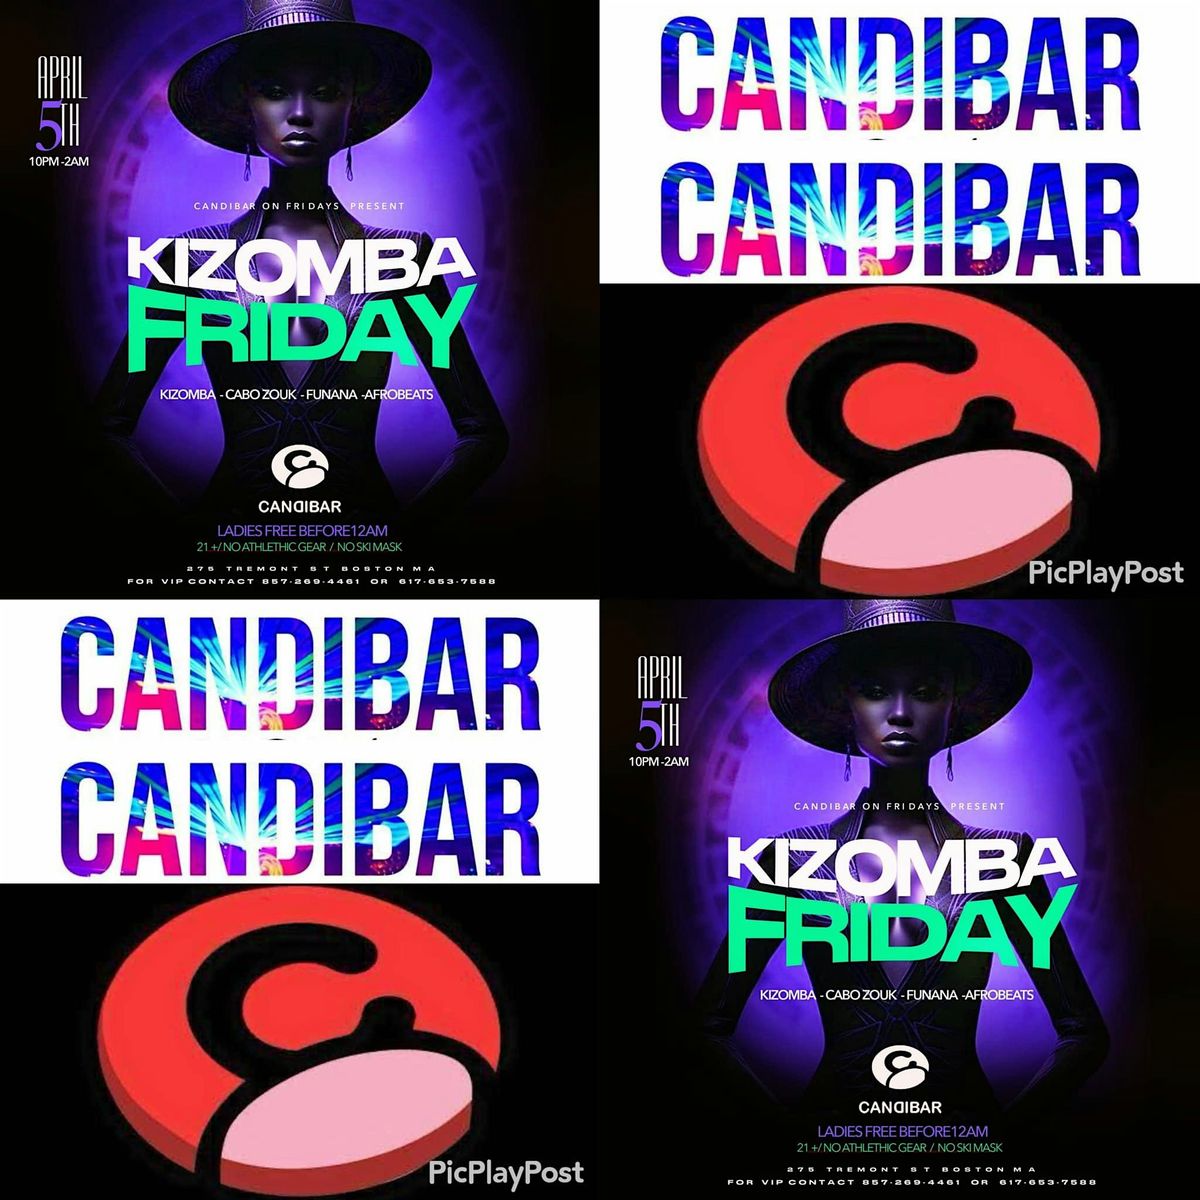 CANDIBAR FRIDAY APRIL 5th WITH THE BEST DJs in THE CITY